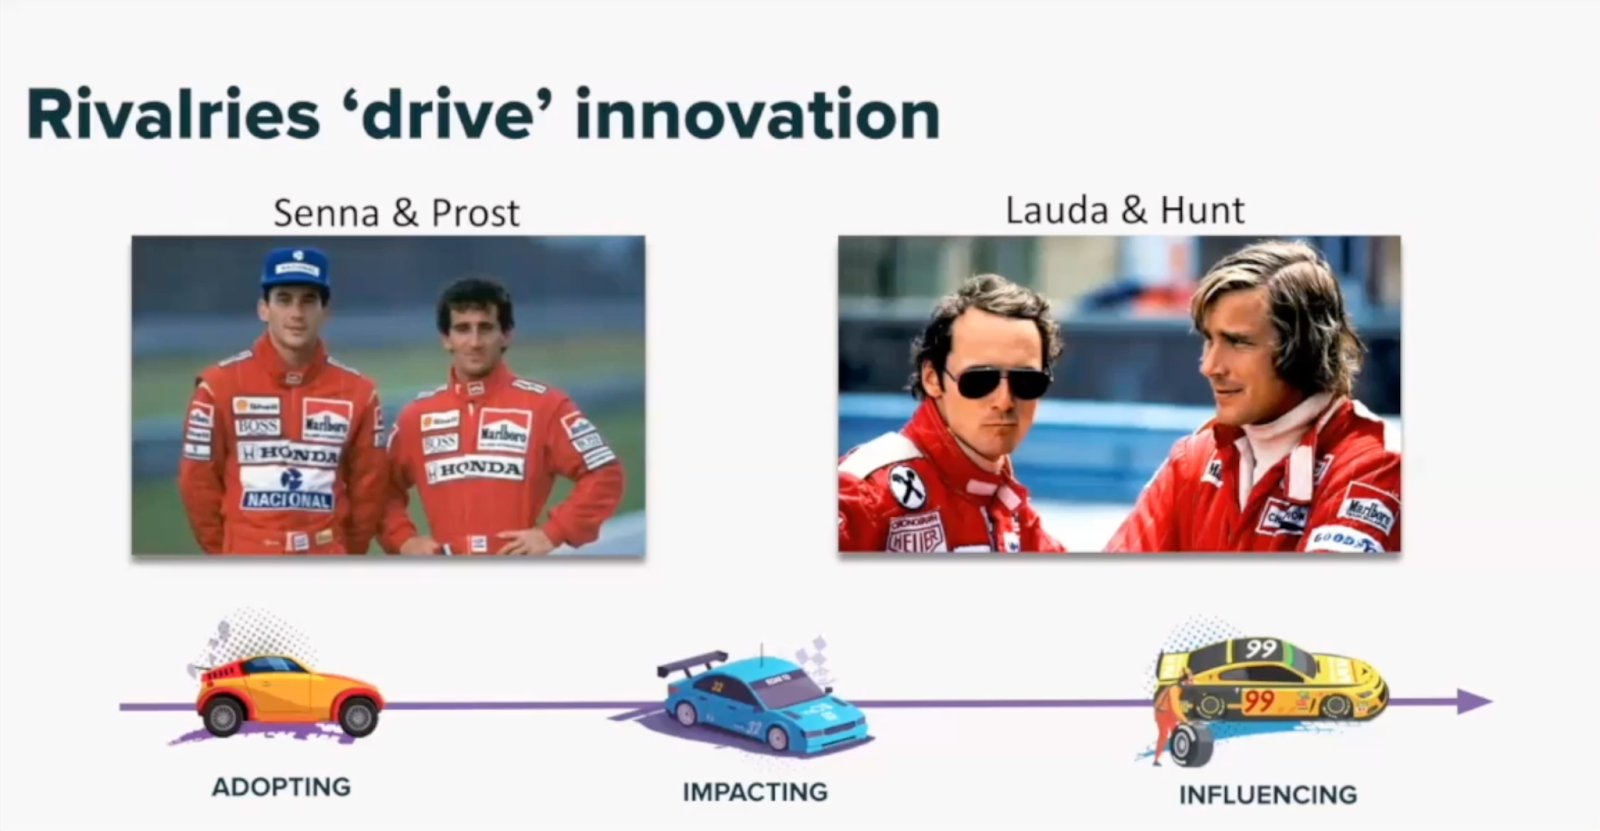 Photos of Senna and Prost, and Lauda and Hunt. An arrow showing three stages of enablement maturity (adopting, impacting, influencing), each represented by an increasingly high-spec racing car.